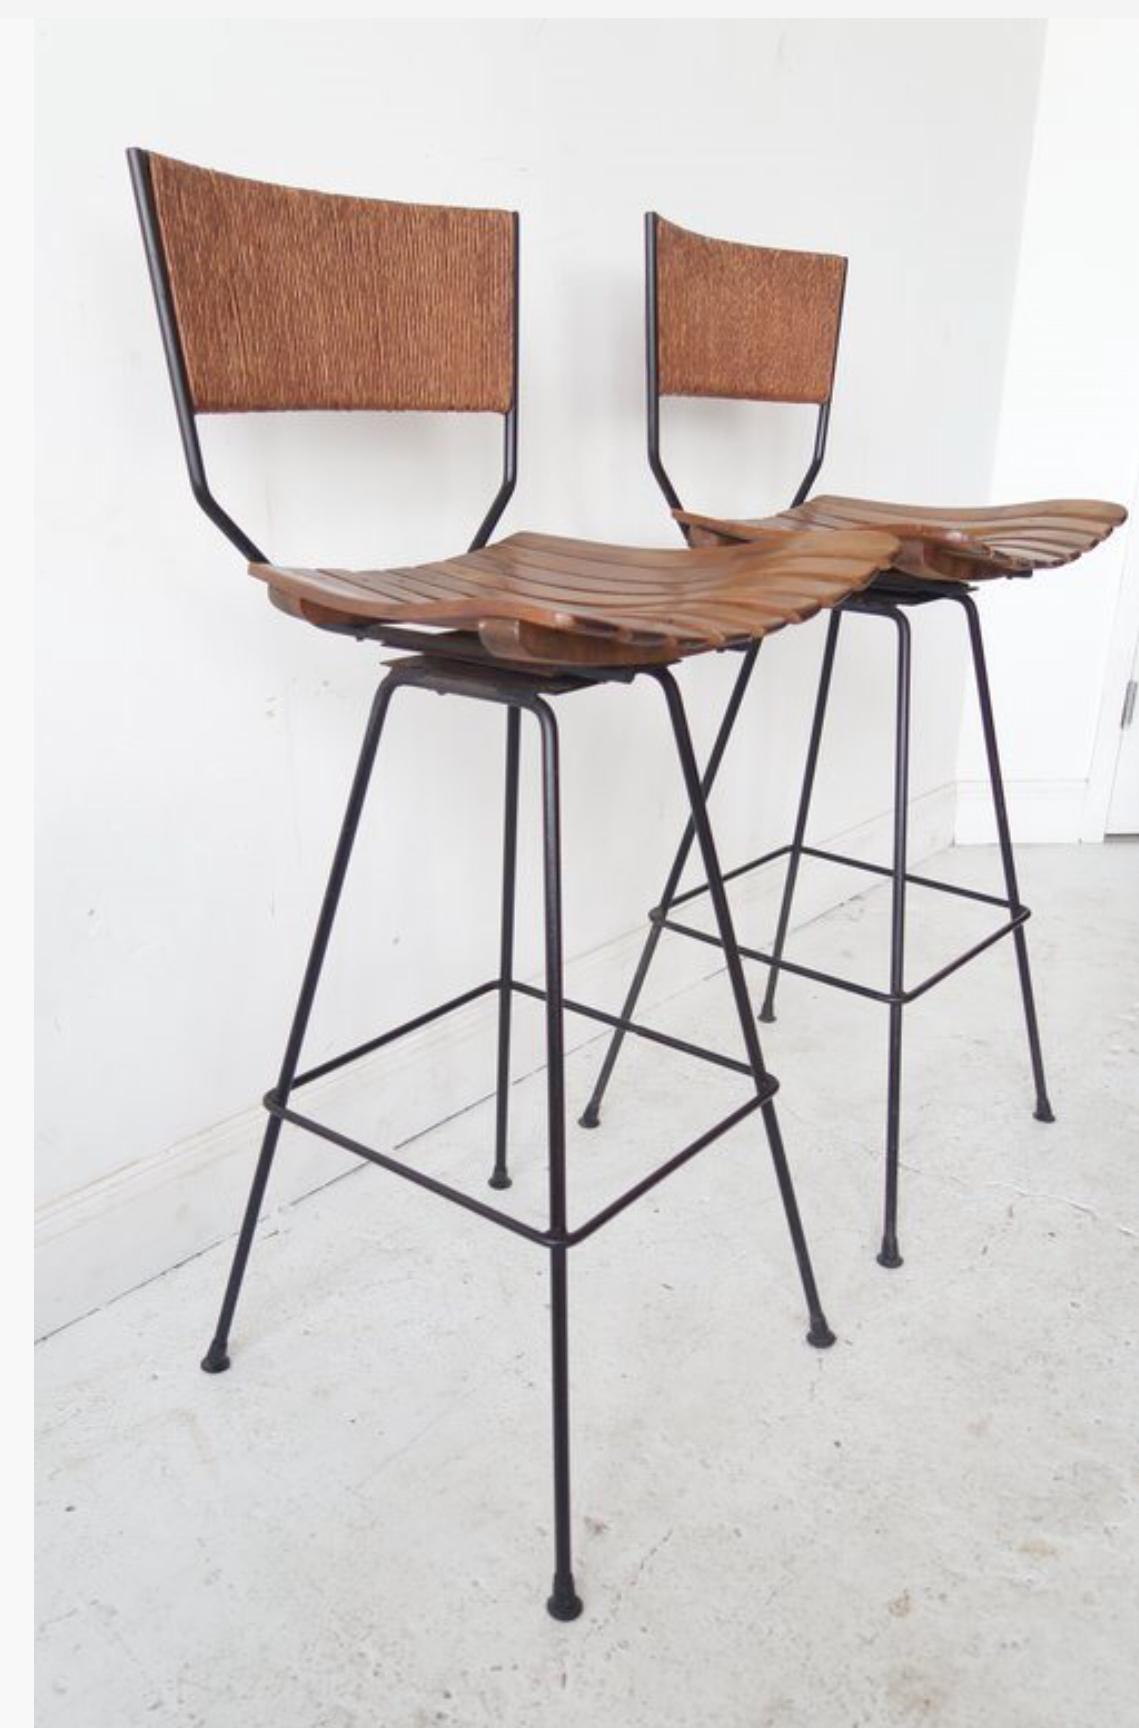 A set of four (4) clean-lined bar stools with wood slatted seat, rattan back and black metal base.  USA, circa 1950.

Priced at $737.50 per stool or $5,900 as a set of eight; contact us to specify a different quantity.

Dimebsions:
37